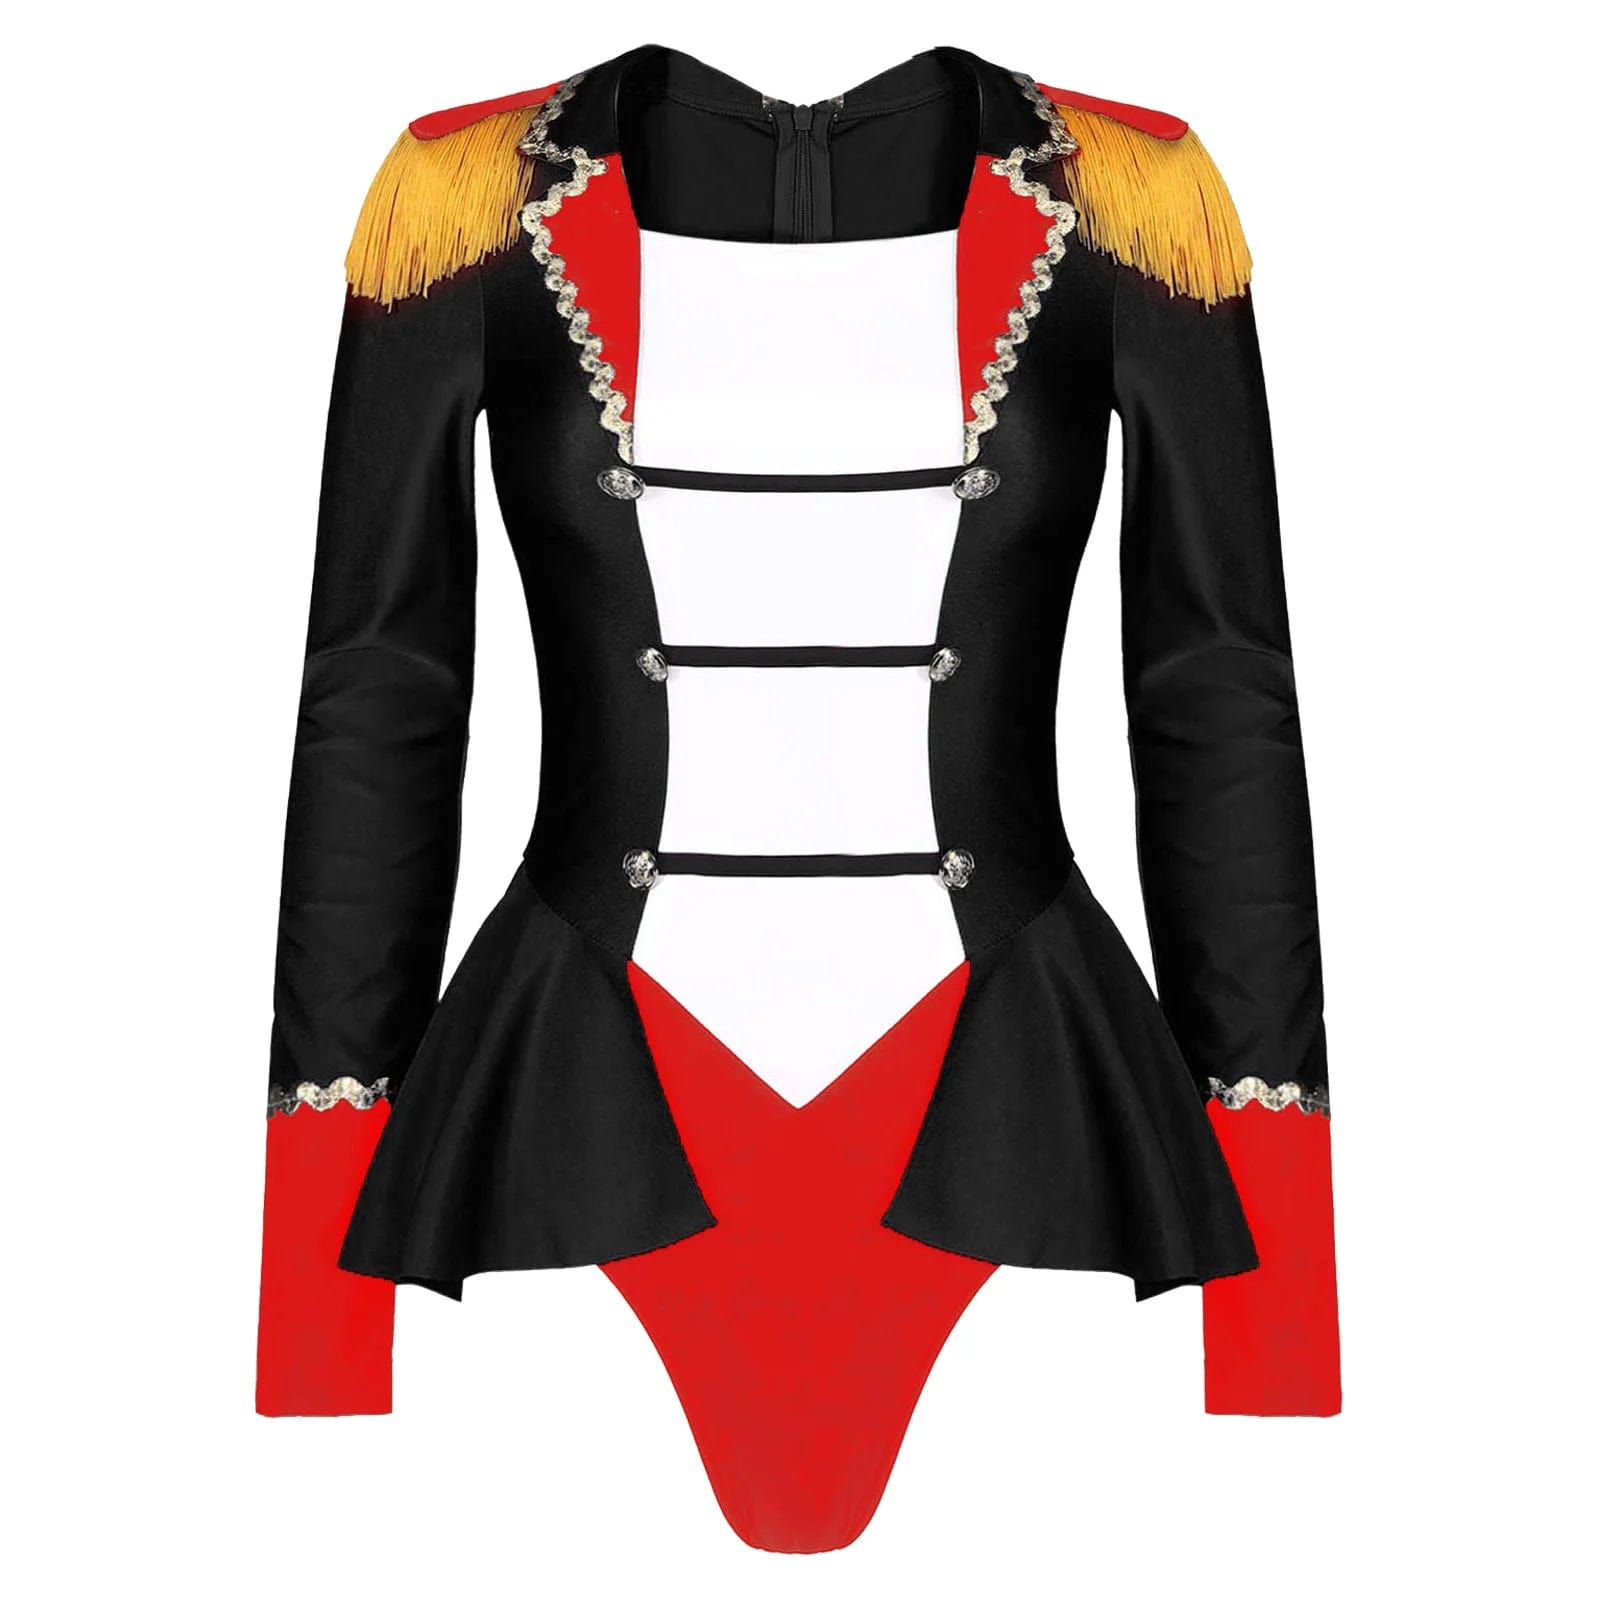 Alvivi Adult Mens Ring Master Jacket Ringleader Circus Showman Costume Open  Front Tailcoat Outerwear Black S : Amazon.co.uk: Fashion